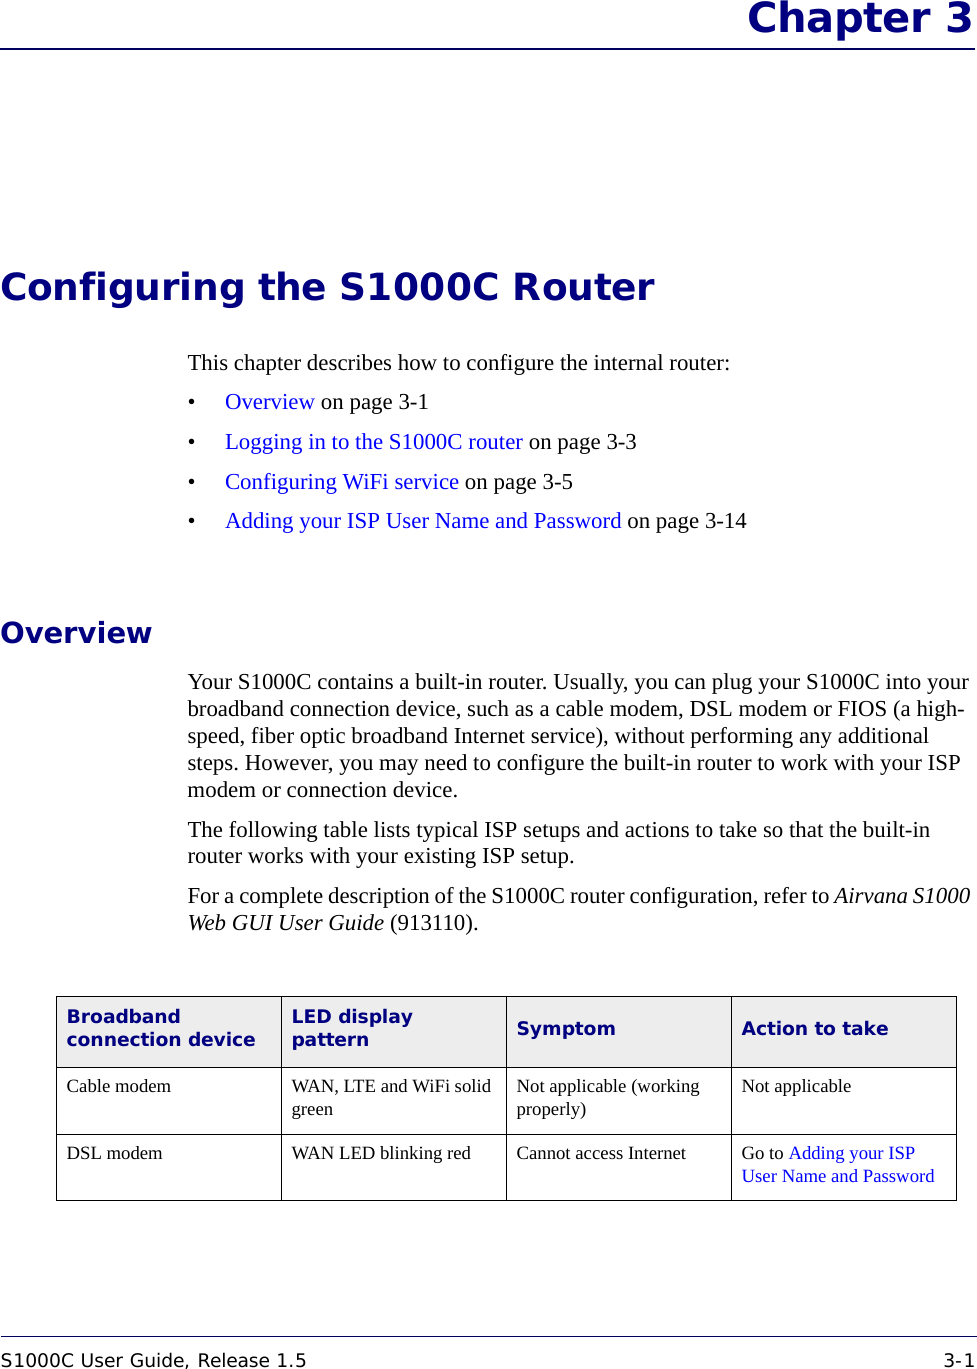 S1000C User Guide, Release 1.5 3-1DRAFT Chapter 3Configuring the S1000C RouterThis chapter describes how to configure the internal router:•Overview on page 3-1•Logging in to the S1000C router on page 3-3•Configuring WiFi service on page 3-5•Adding your ISP User Name and Password on page 3-14OverviewYour S1000C contains a built-in router. Usually, you can plug your S1000C into your broadband connection device, such as a cable modem, DSL modem or FIOS (a high-speed, fiber optic broadband Internet service), without performing any additional steps. However, you may need to configure the built-in router to work with your ISP modem or connection device.The following table lists typical ISP setups and actions to take so that the built-in router works with your existing ISP setup.For a complete description of the S1000C router configuration, refer to Airvana S1000 Web GUI User Guide (913110).Broadband connection device LED display pattern Symptom Action to takeCable modem WAN, LTE and WiFi solid green Not applicable (working properly) Not applicableDSL modem WAN LED blinking red Cannot access Internet Go to Adding your ISP User Name and Password